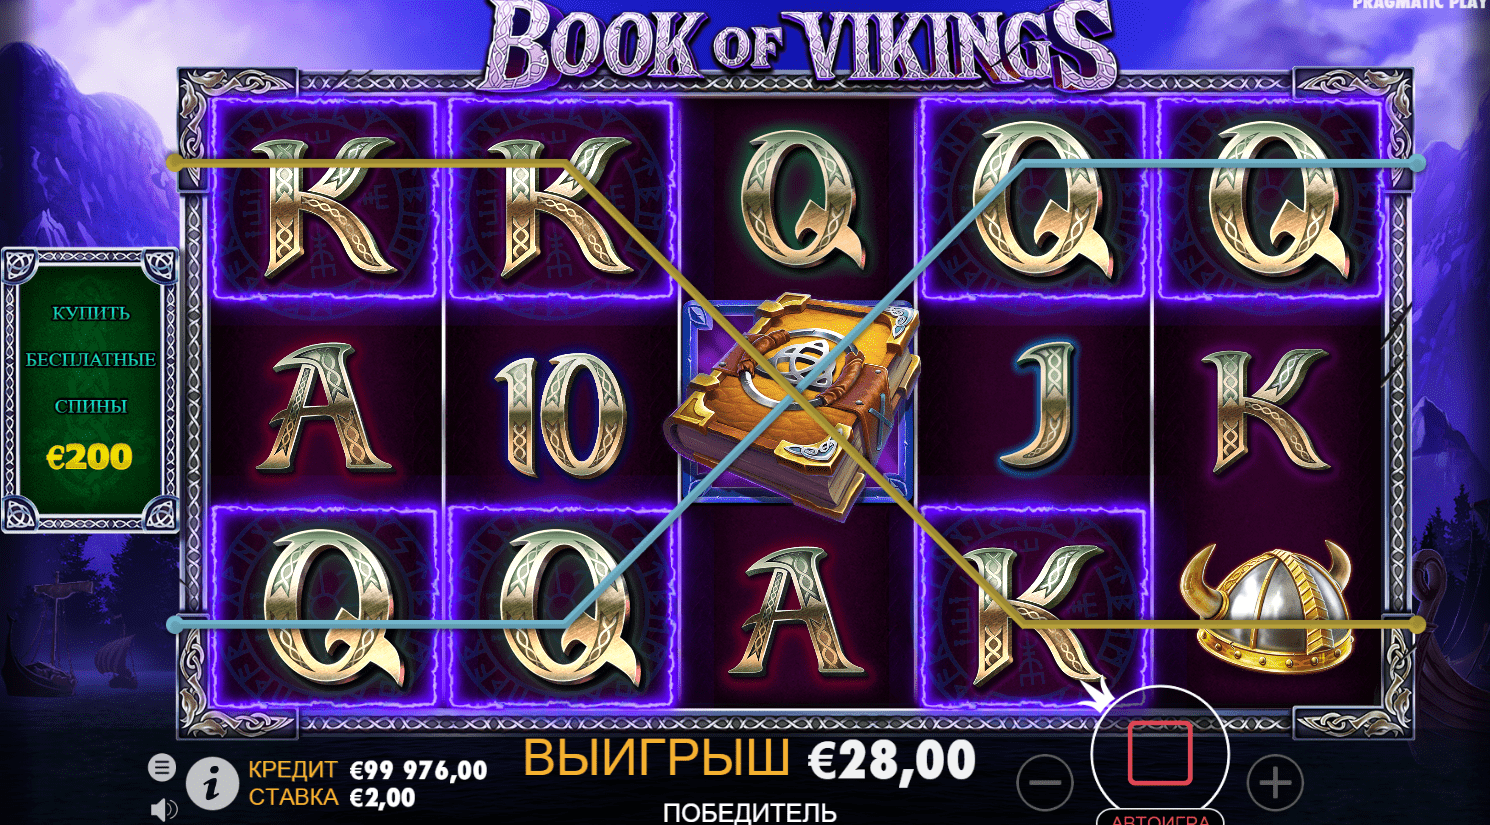 Book of Vikings free spins